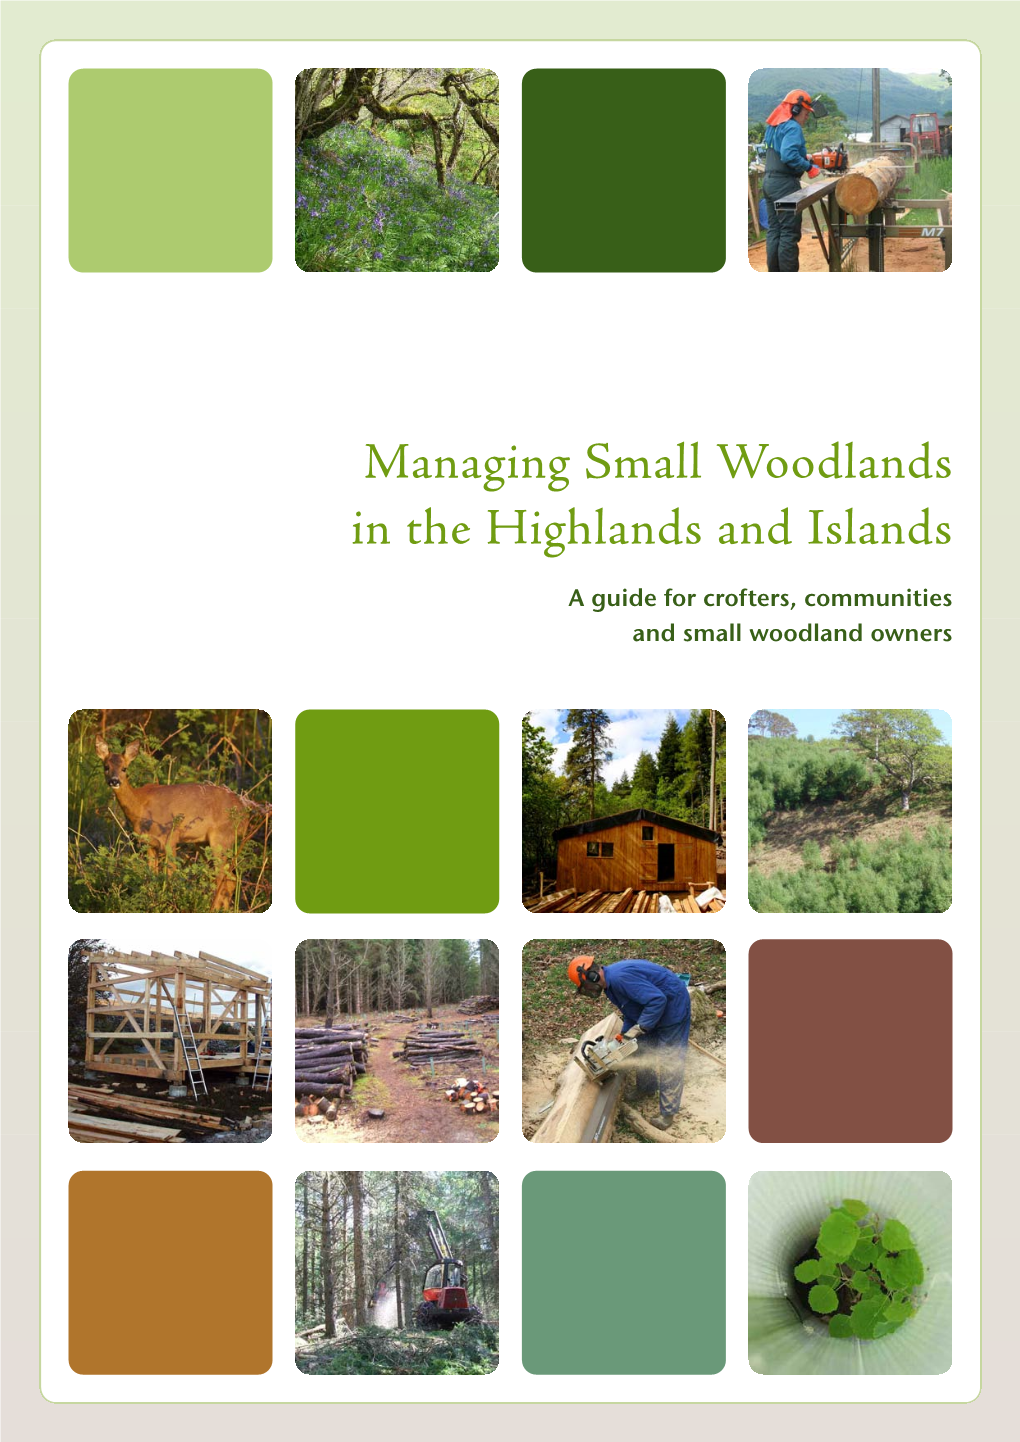 Managing Small Woodlands in the Highlands and Islands